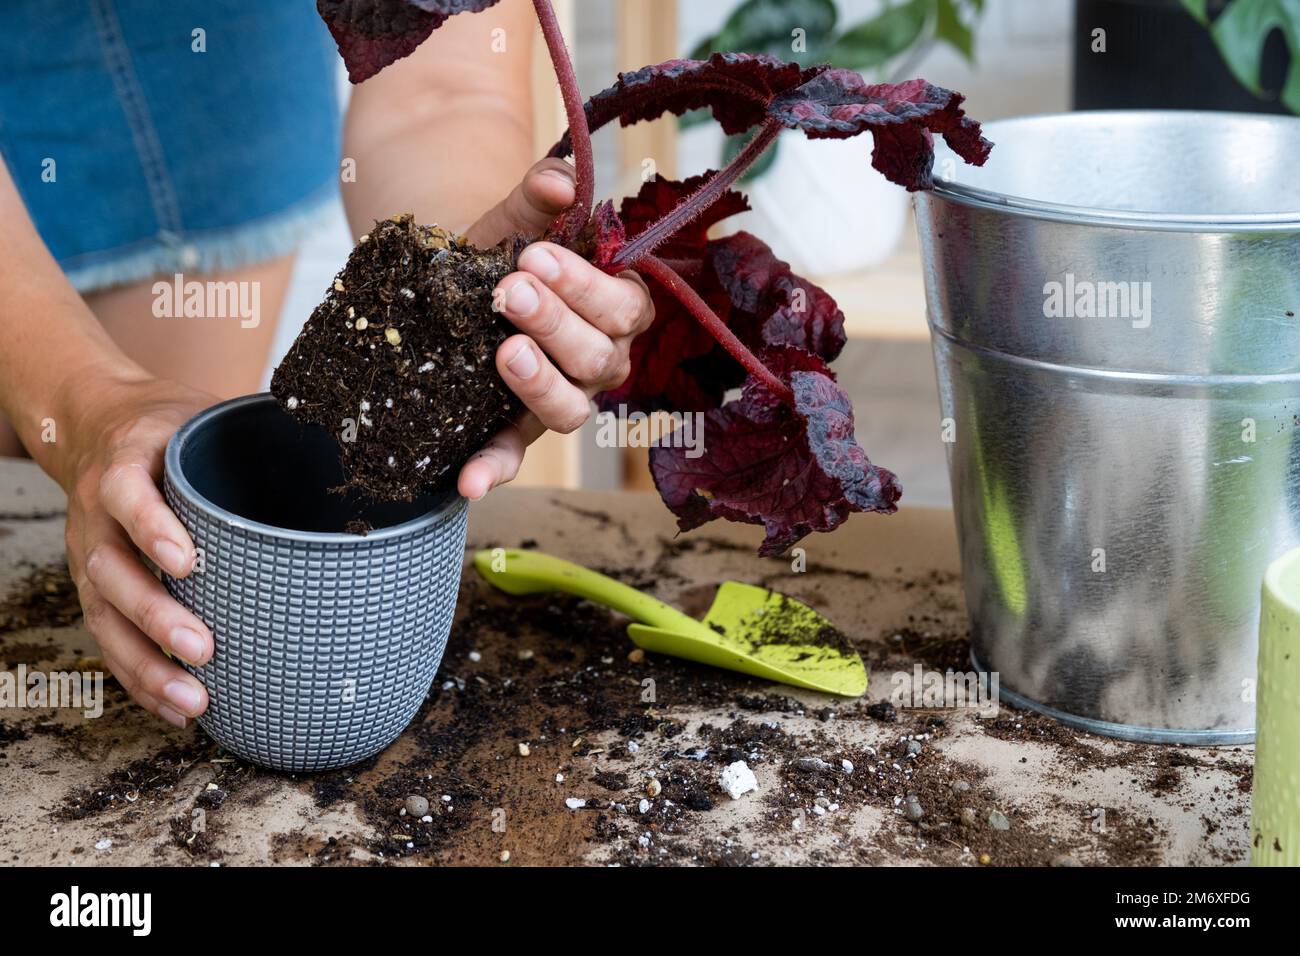 Transplanting a home plant Begonia into a pot. A woman plants a stalk earthen lump with roots in a new soil. Caring for a potted Stock Photo